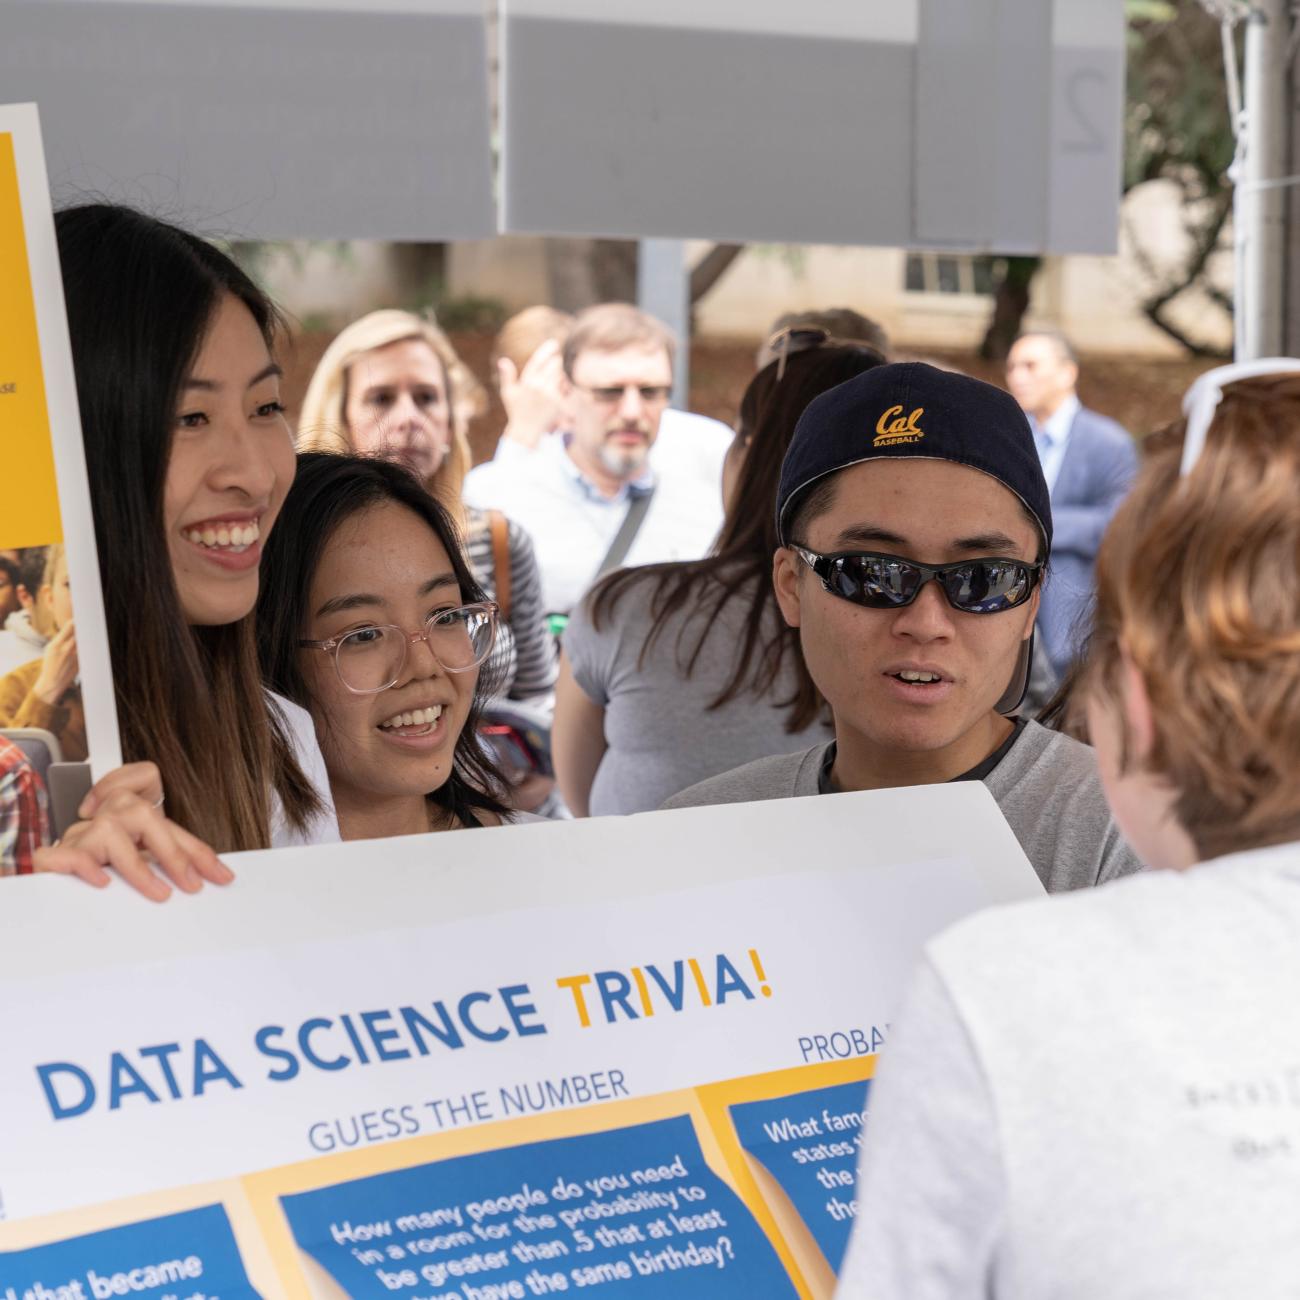 Smiling students at CalDay showing a Data Science Trivia poster to an interested passerby